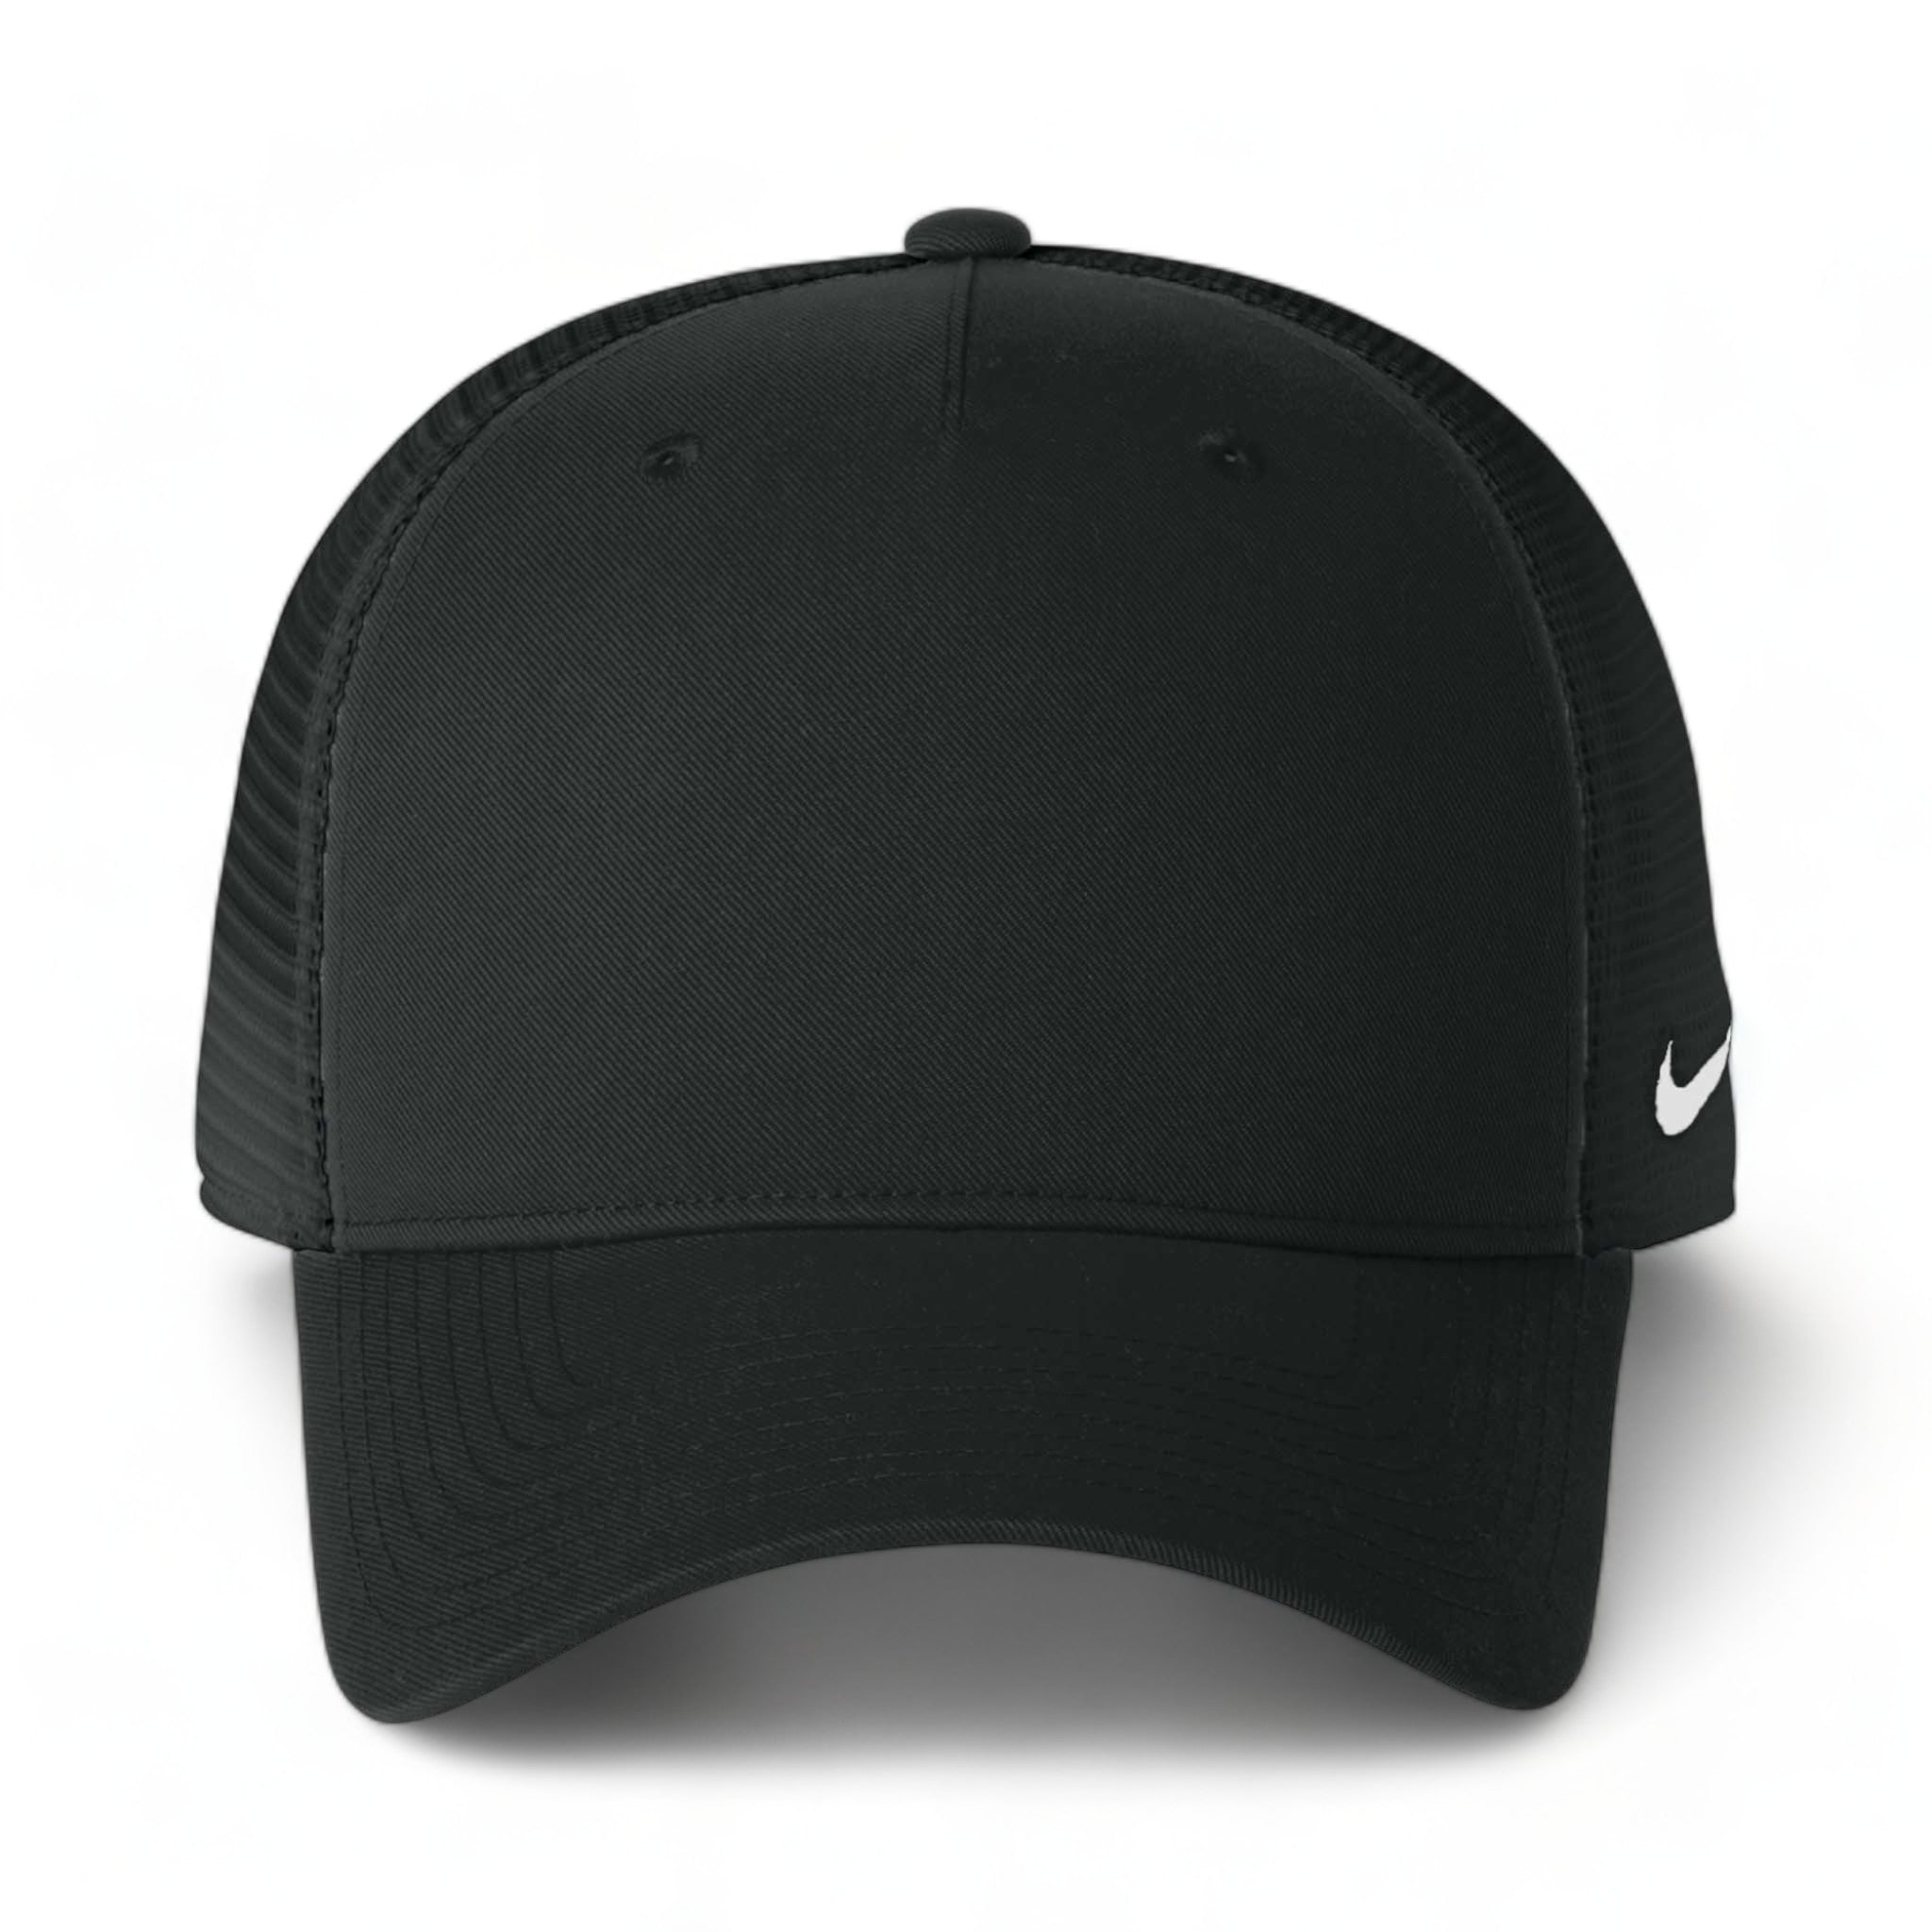 Front view of Nike NKFN9893 custom hat in black and black